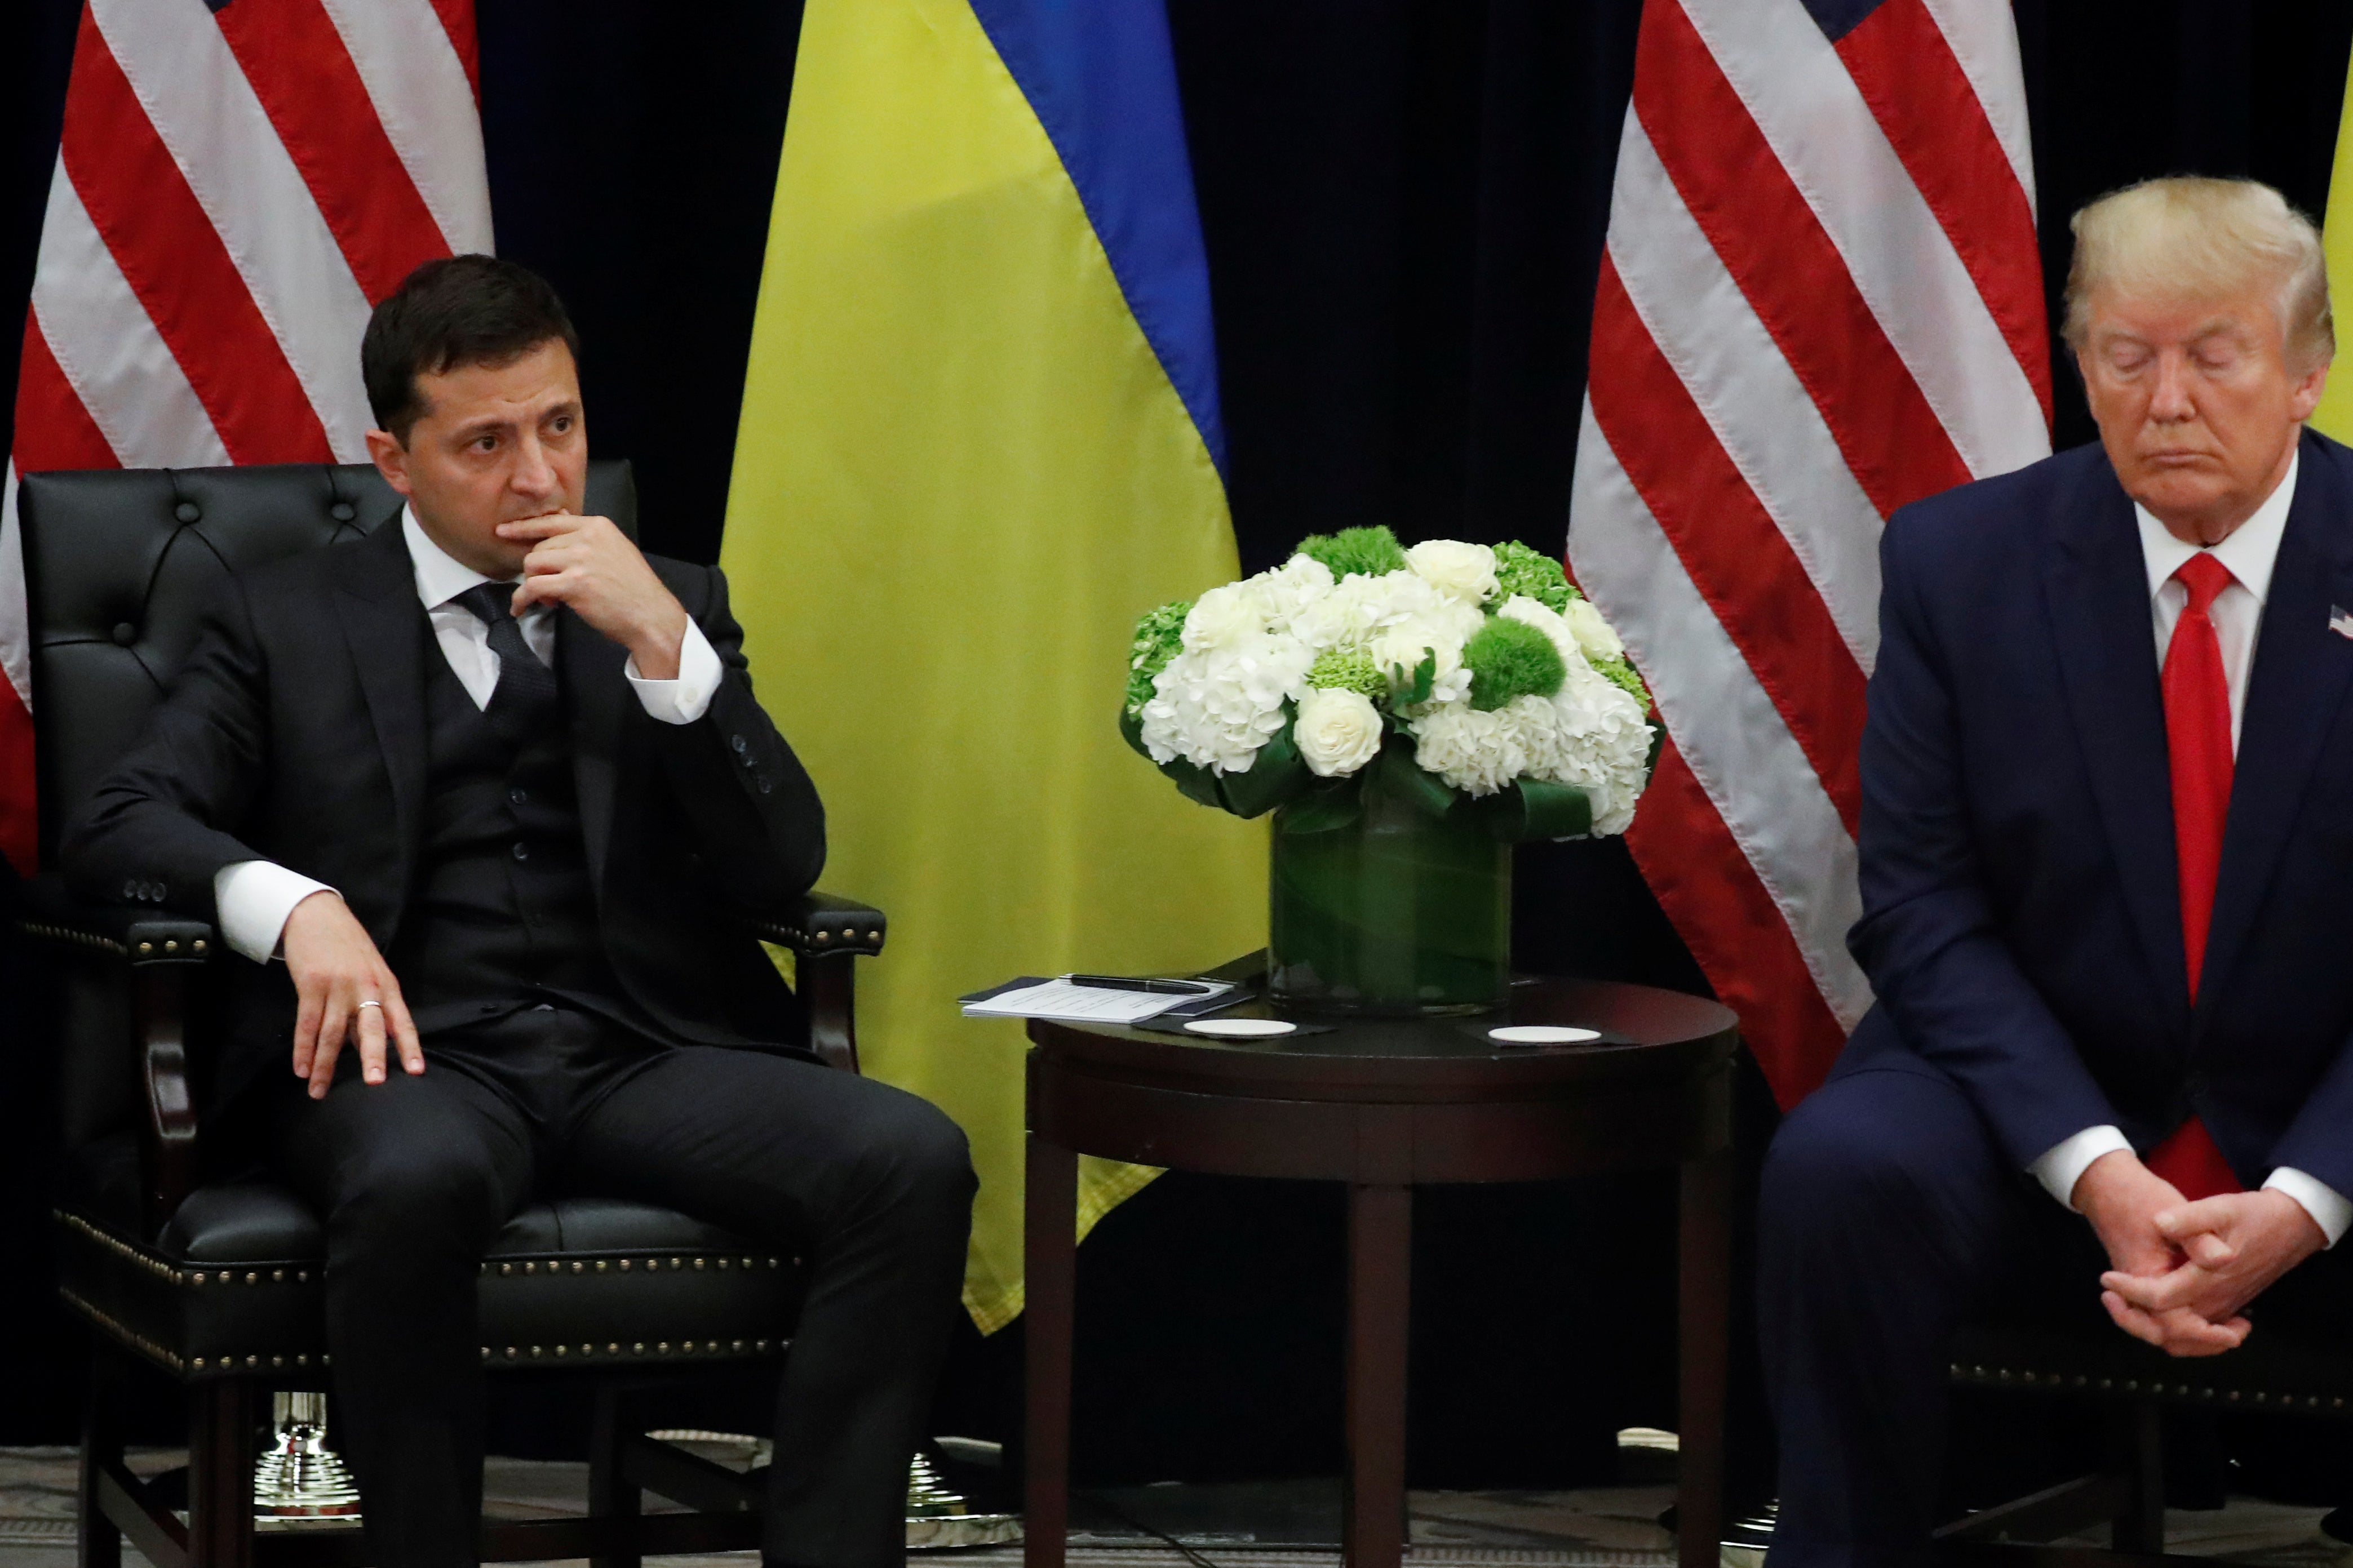 Ukrainian President Volodymyr Zelensky and U.S. President Donald Trump at the United Nations General Assembly in New York on Sept. 25.